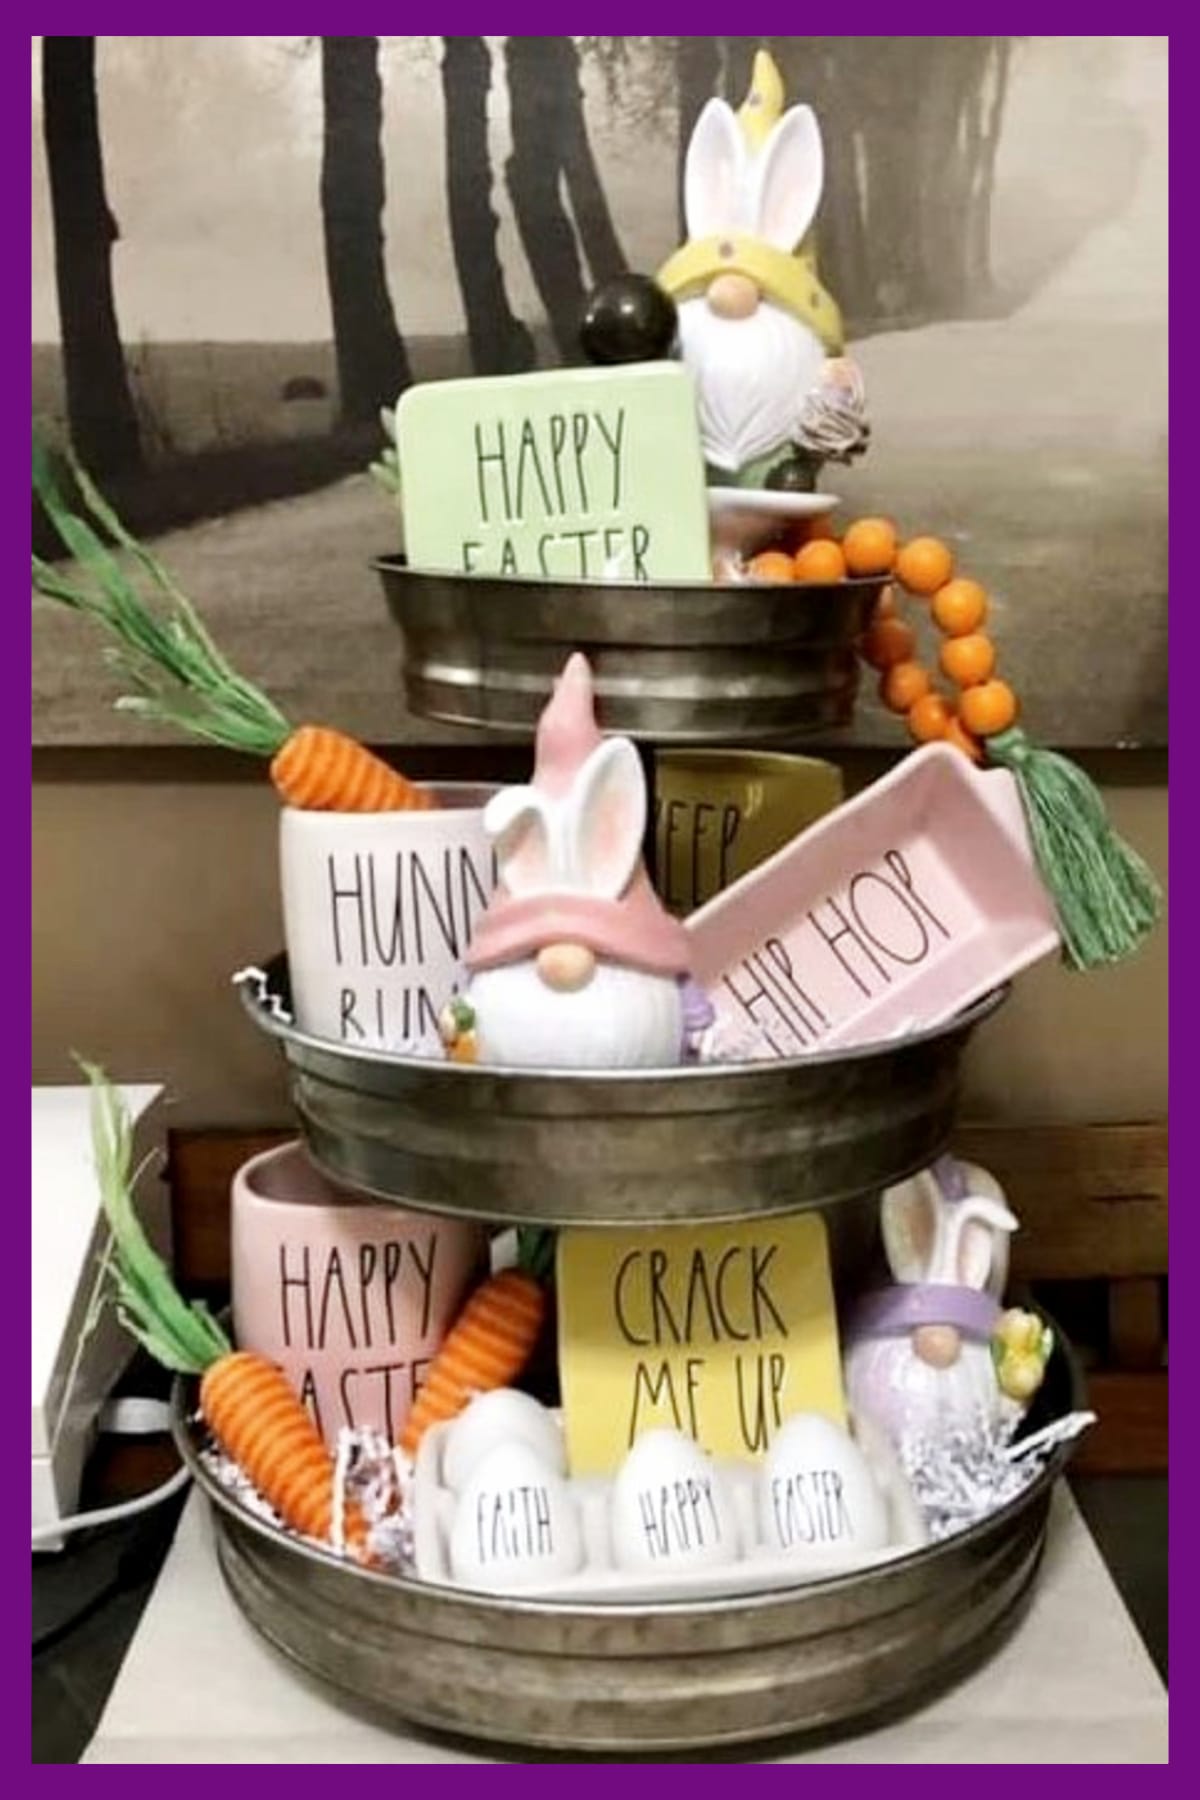 Easter tray decor ideas - gnome bunnies and more Easter decorations on a 3-tier tray - cute Spring decor ideas with Springtime decorations